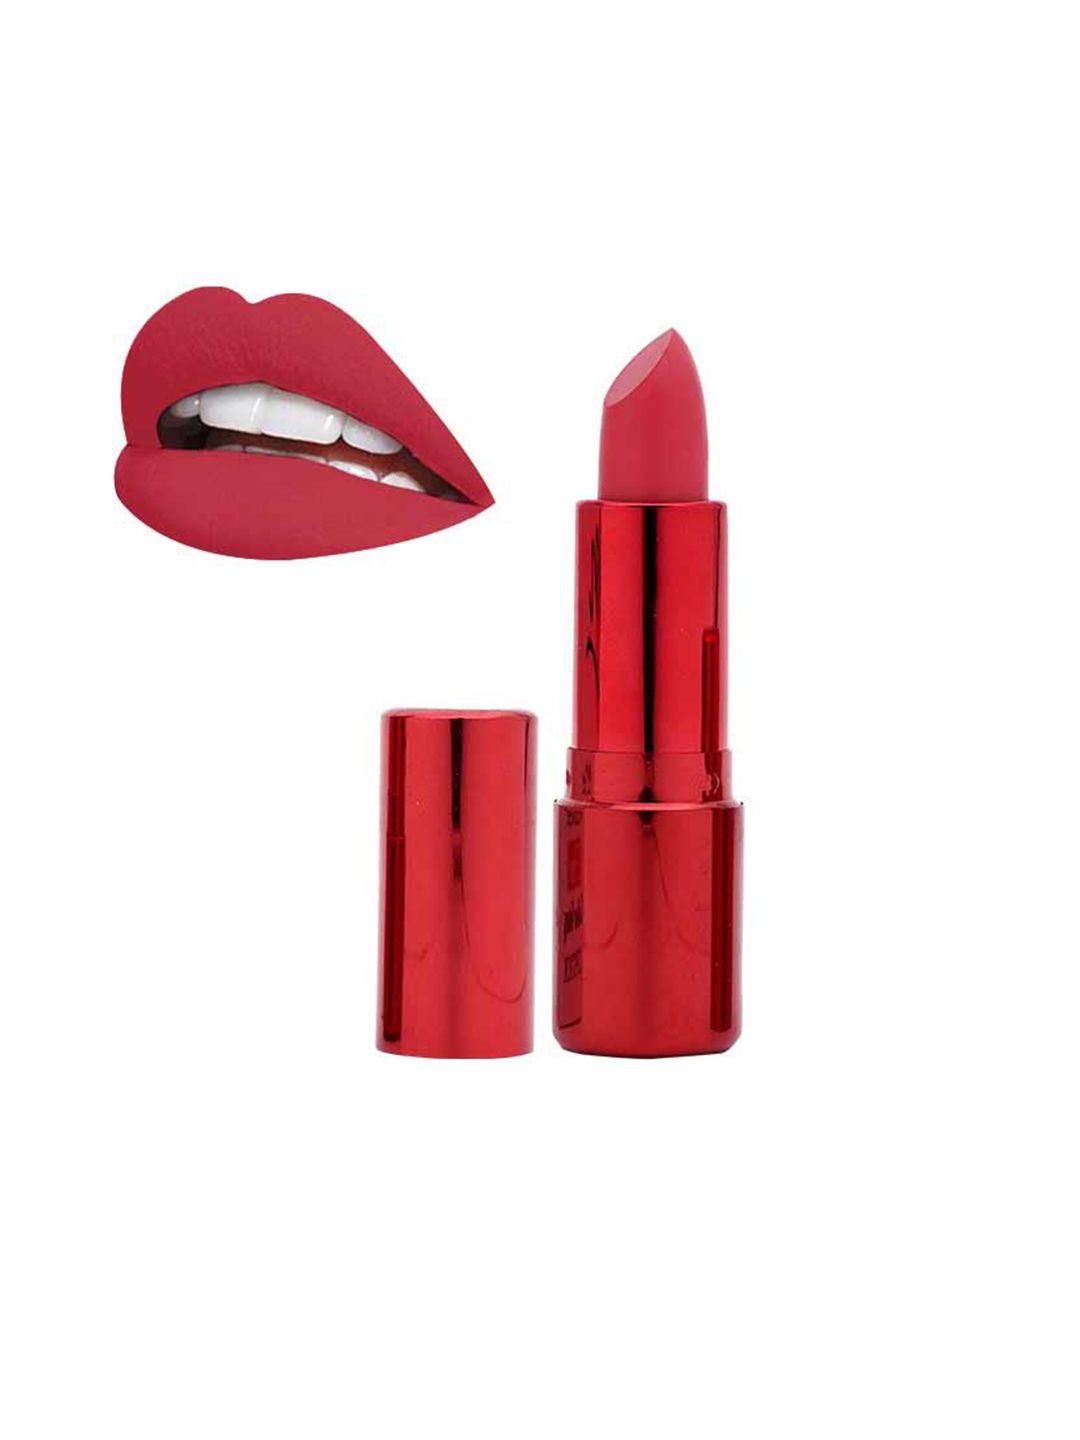 beautyrelay london 12 hour color stay lipstick with vitamin c 3.5g - wild rose